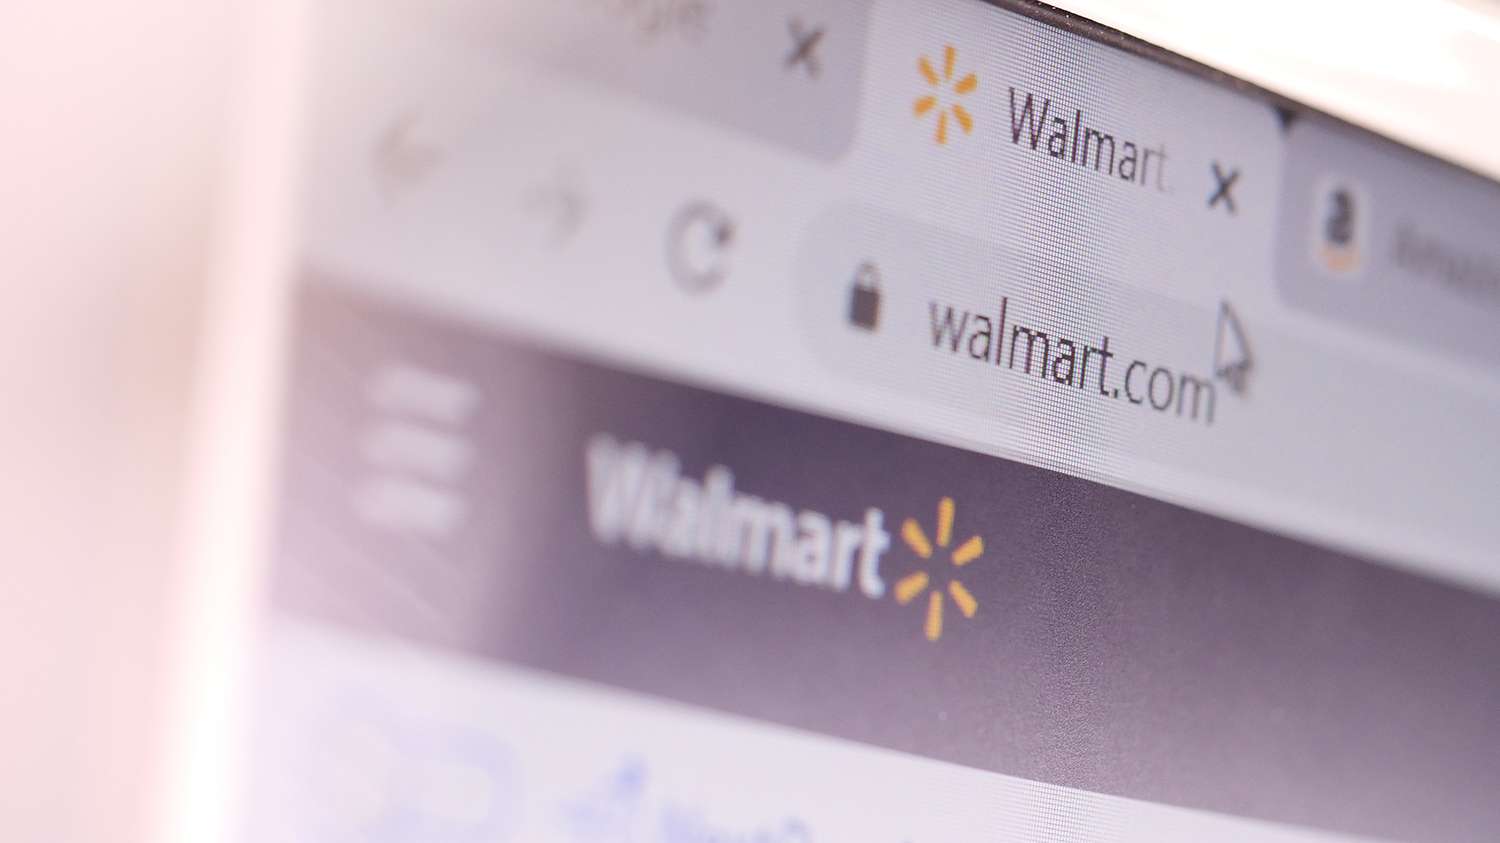 Walmart Expands Sponsored Search to Include Videos